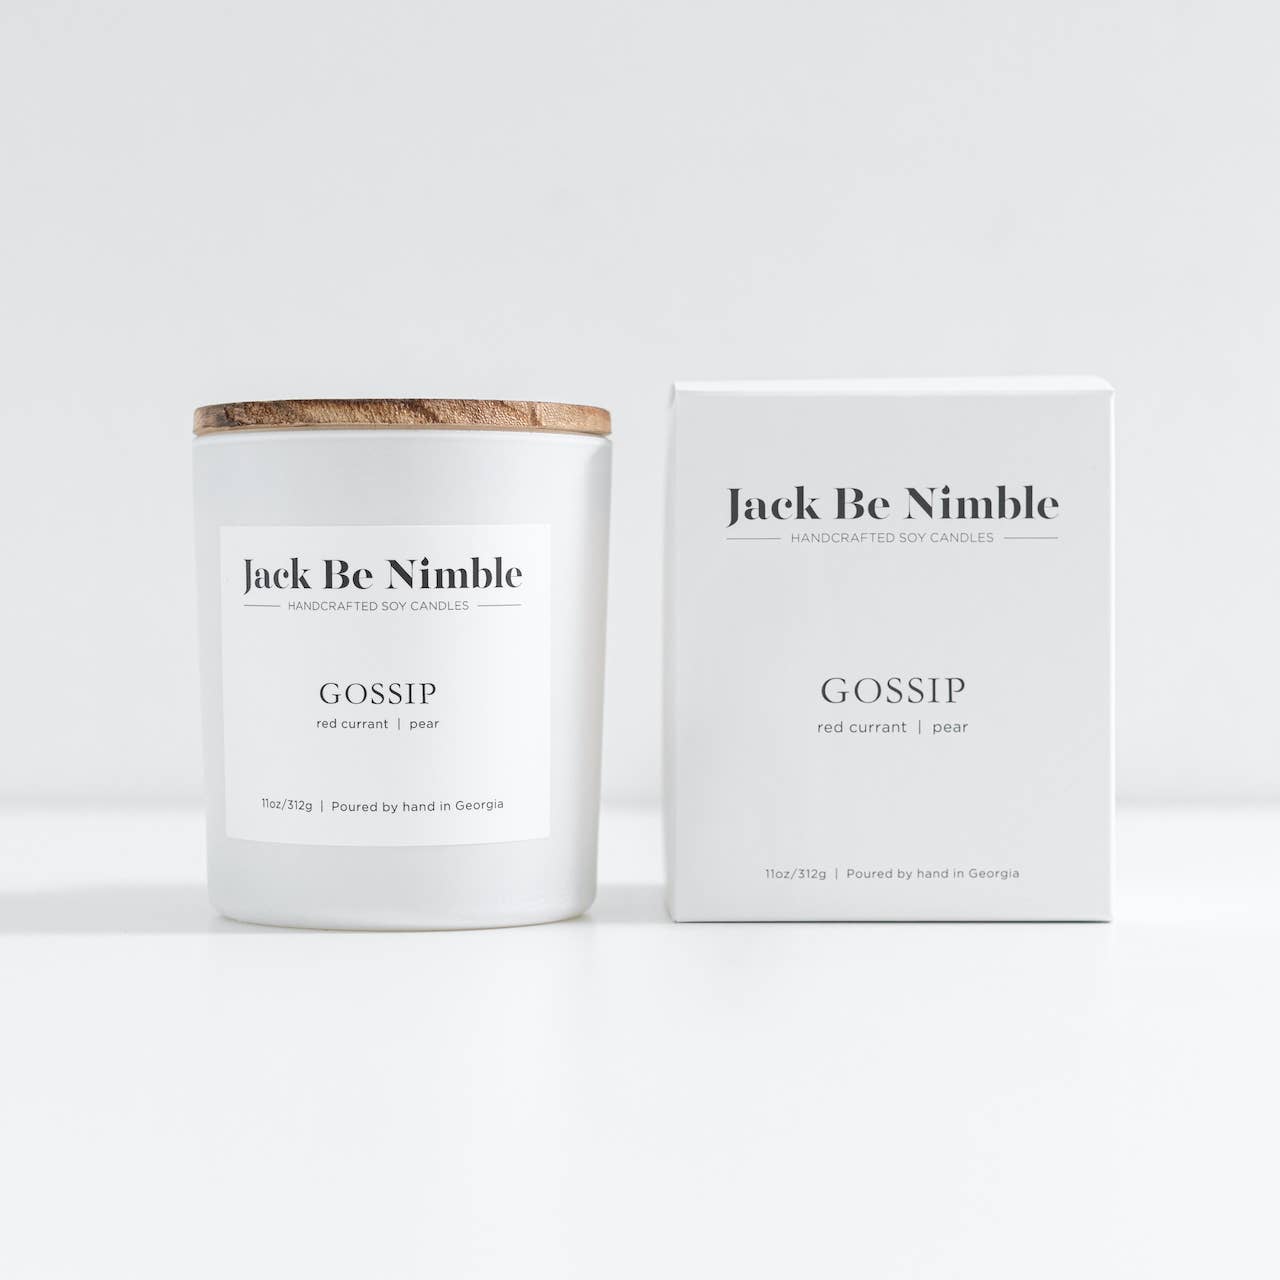 Jack Be Nimble 11oz Gossip Scented Soy Candle